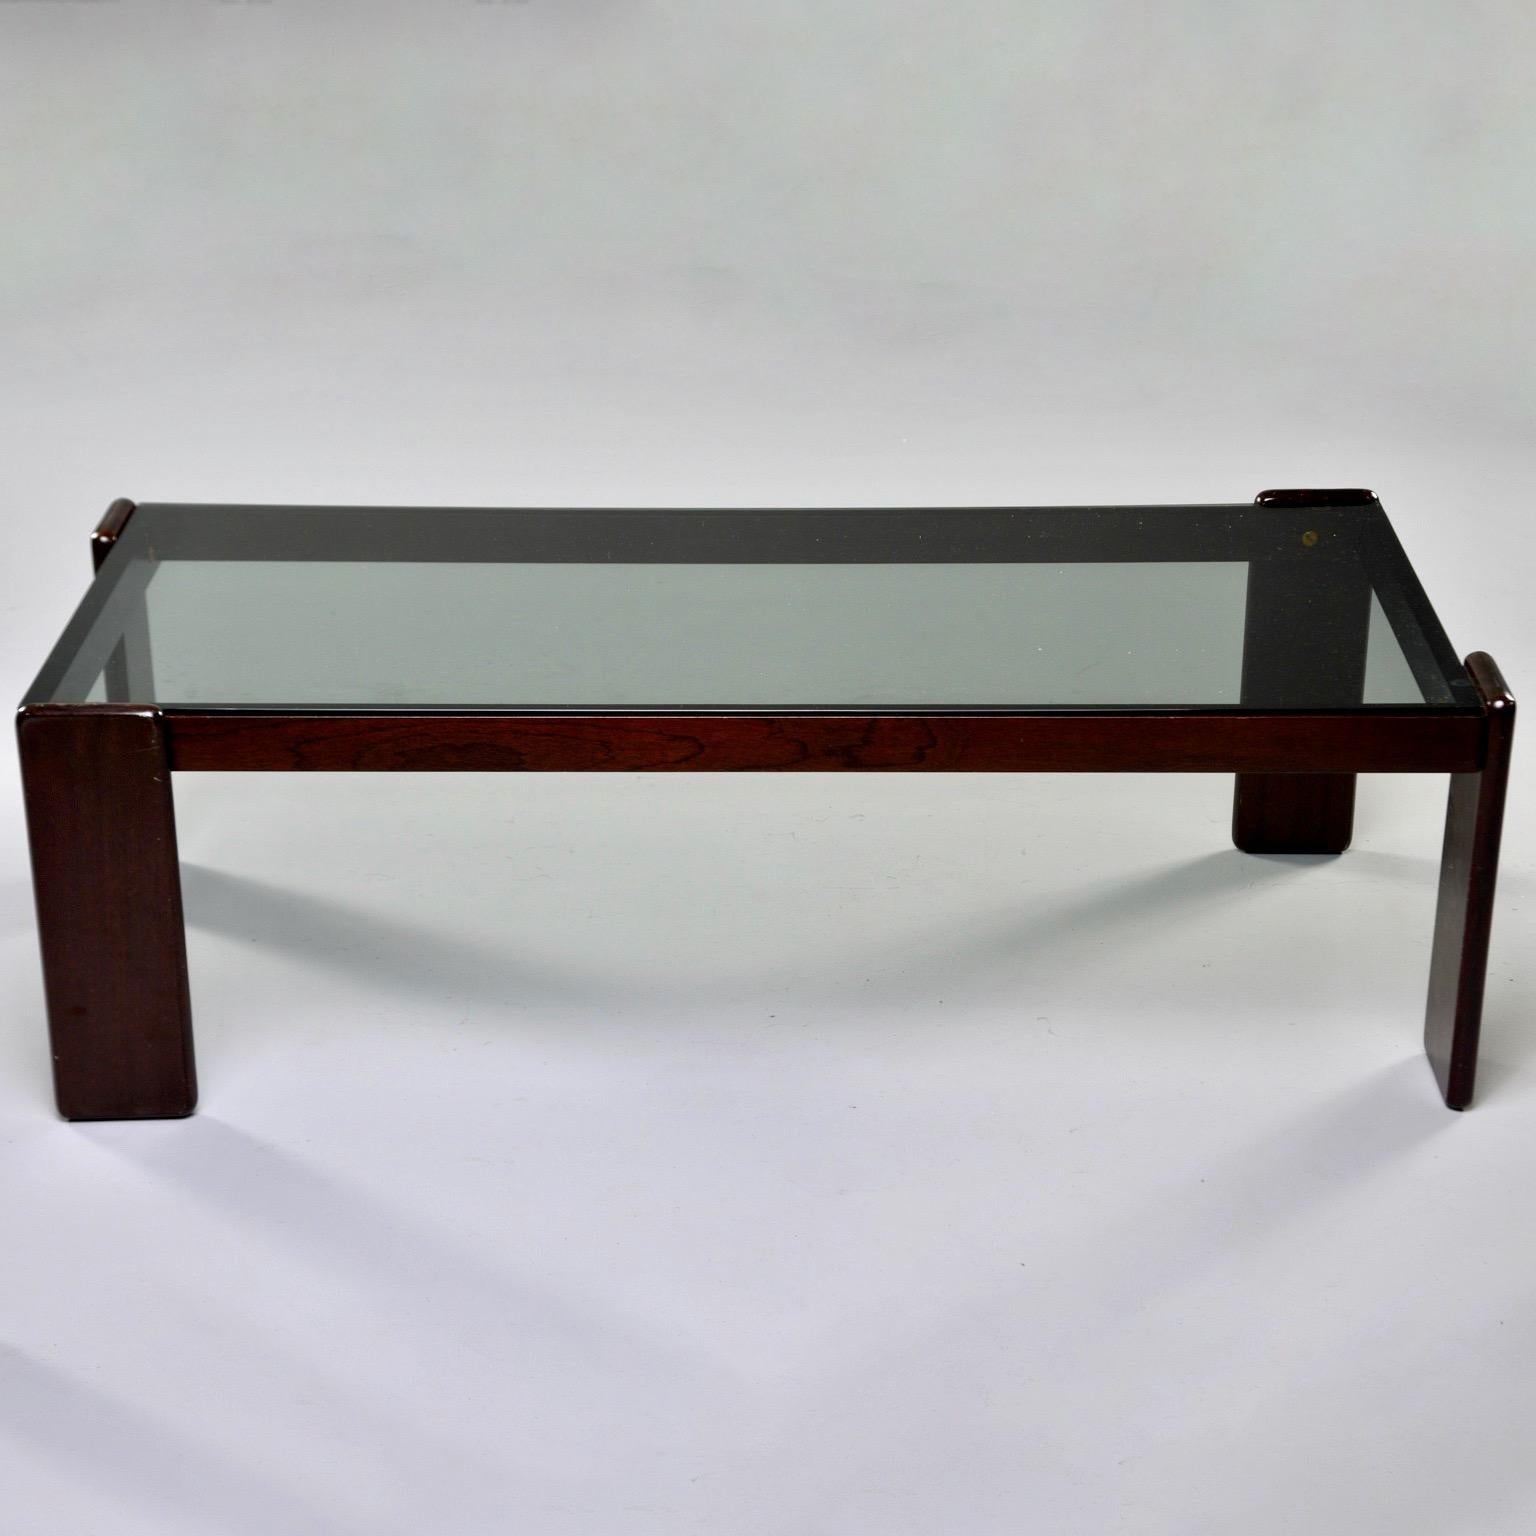 Italian cocktail table has a dark stained wood frame with smoke colored glass top, circa 1970s. Flat, rectangular legs are oriented with one affixed to each short side one on each long side to add visual interest. Unknown maker. 

Glass Only: 47.25”